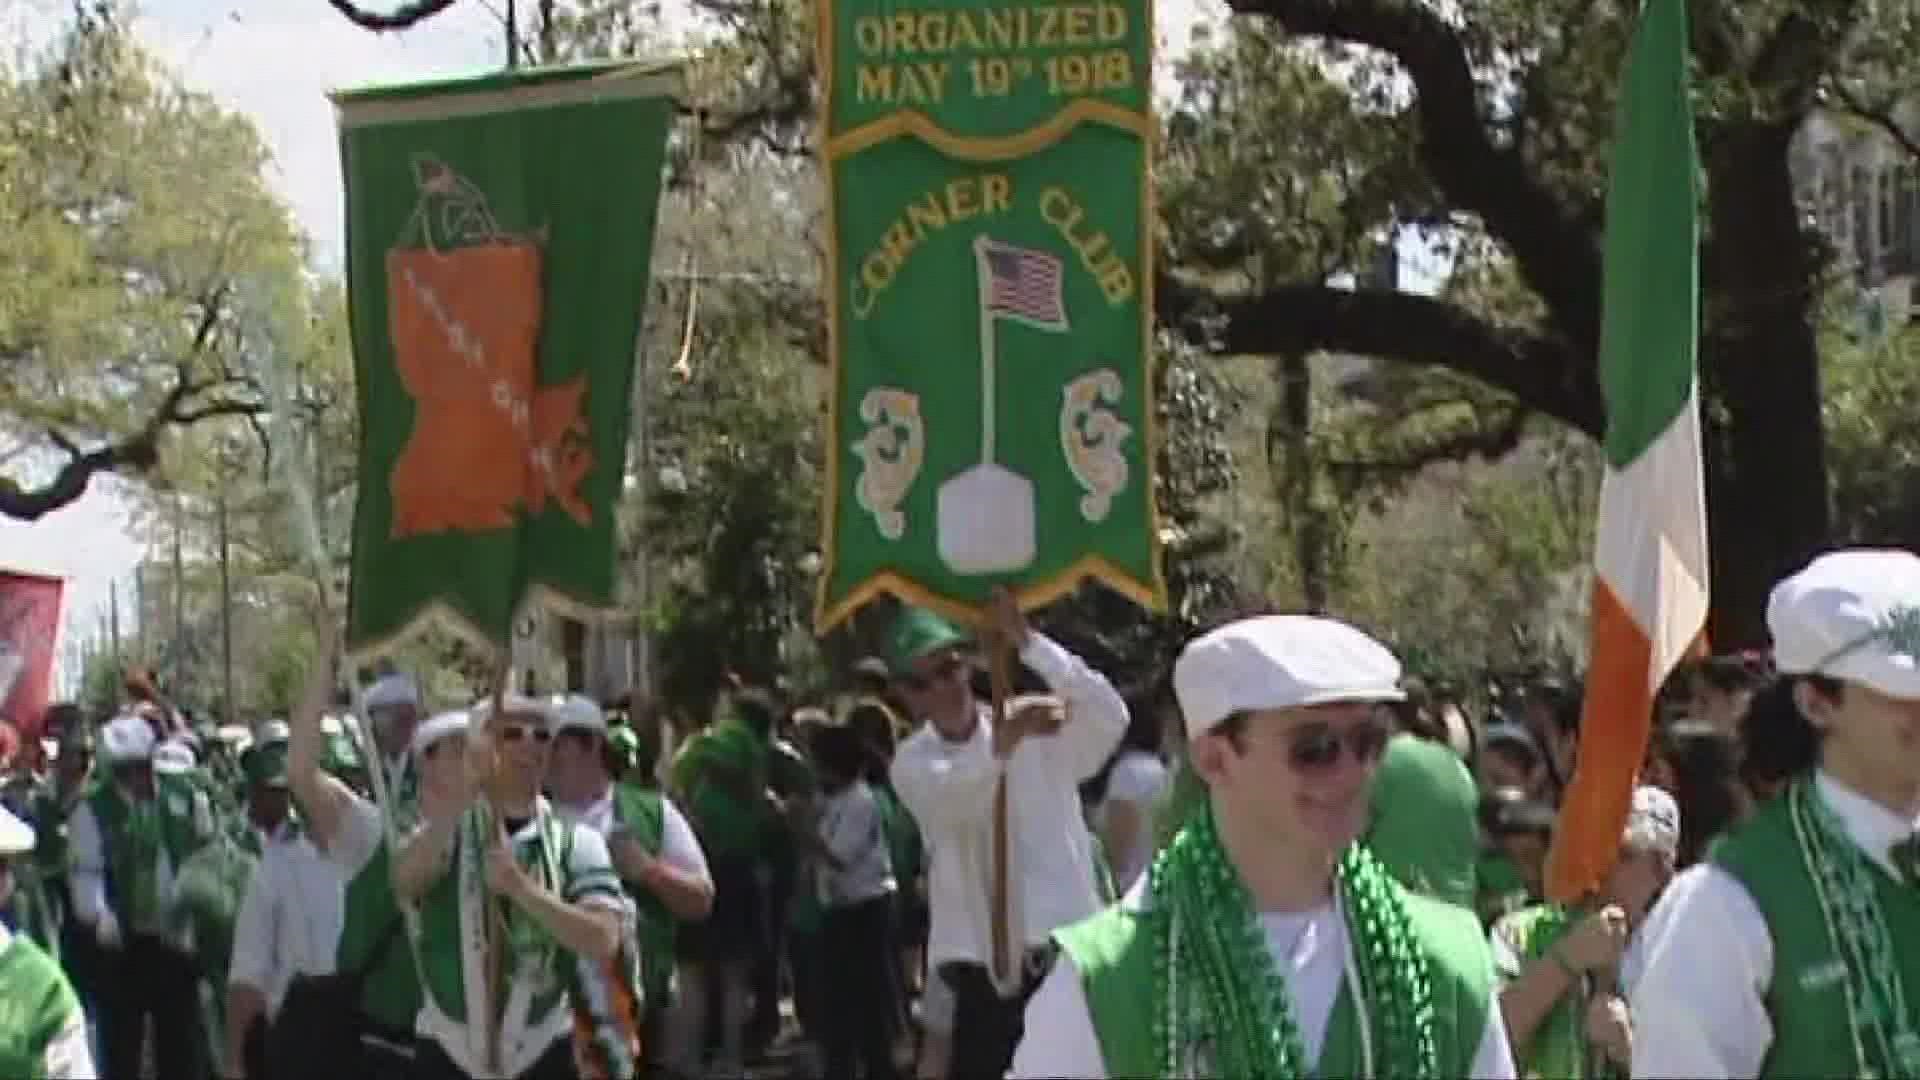 For the first time in two years, the Irish Channel St. Patricks day parade will roll despite the expected winds and 40 degree weather.